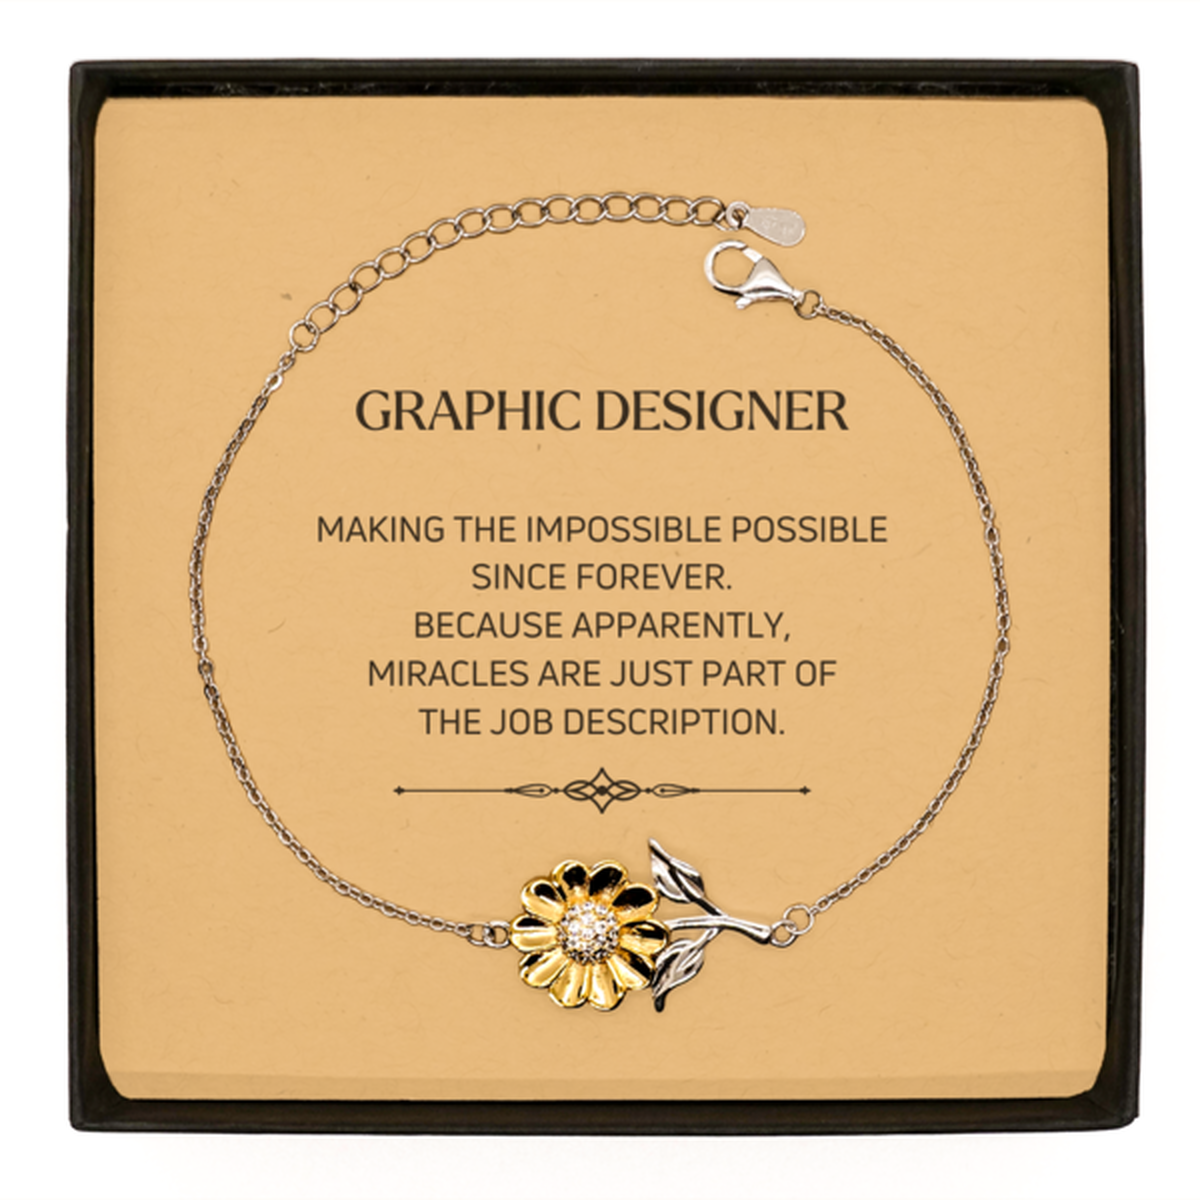 Funny Graphic Designer Gifts, Miracles are just part of the job description, Inspirational Birthday Sunflower Bracelet For Graphic Designer, Men, Women, Coworkers, Friends, Boss